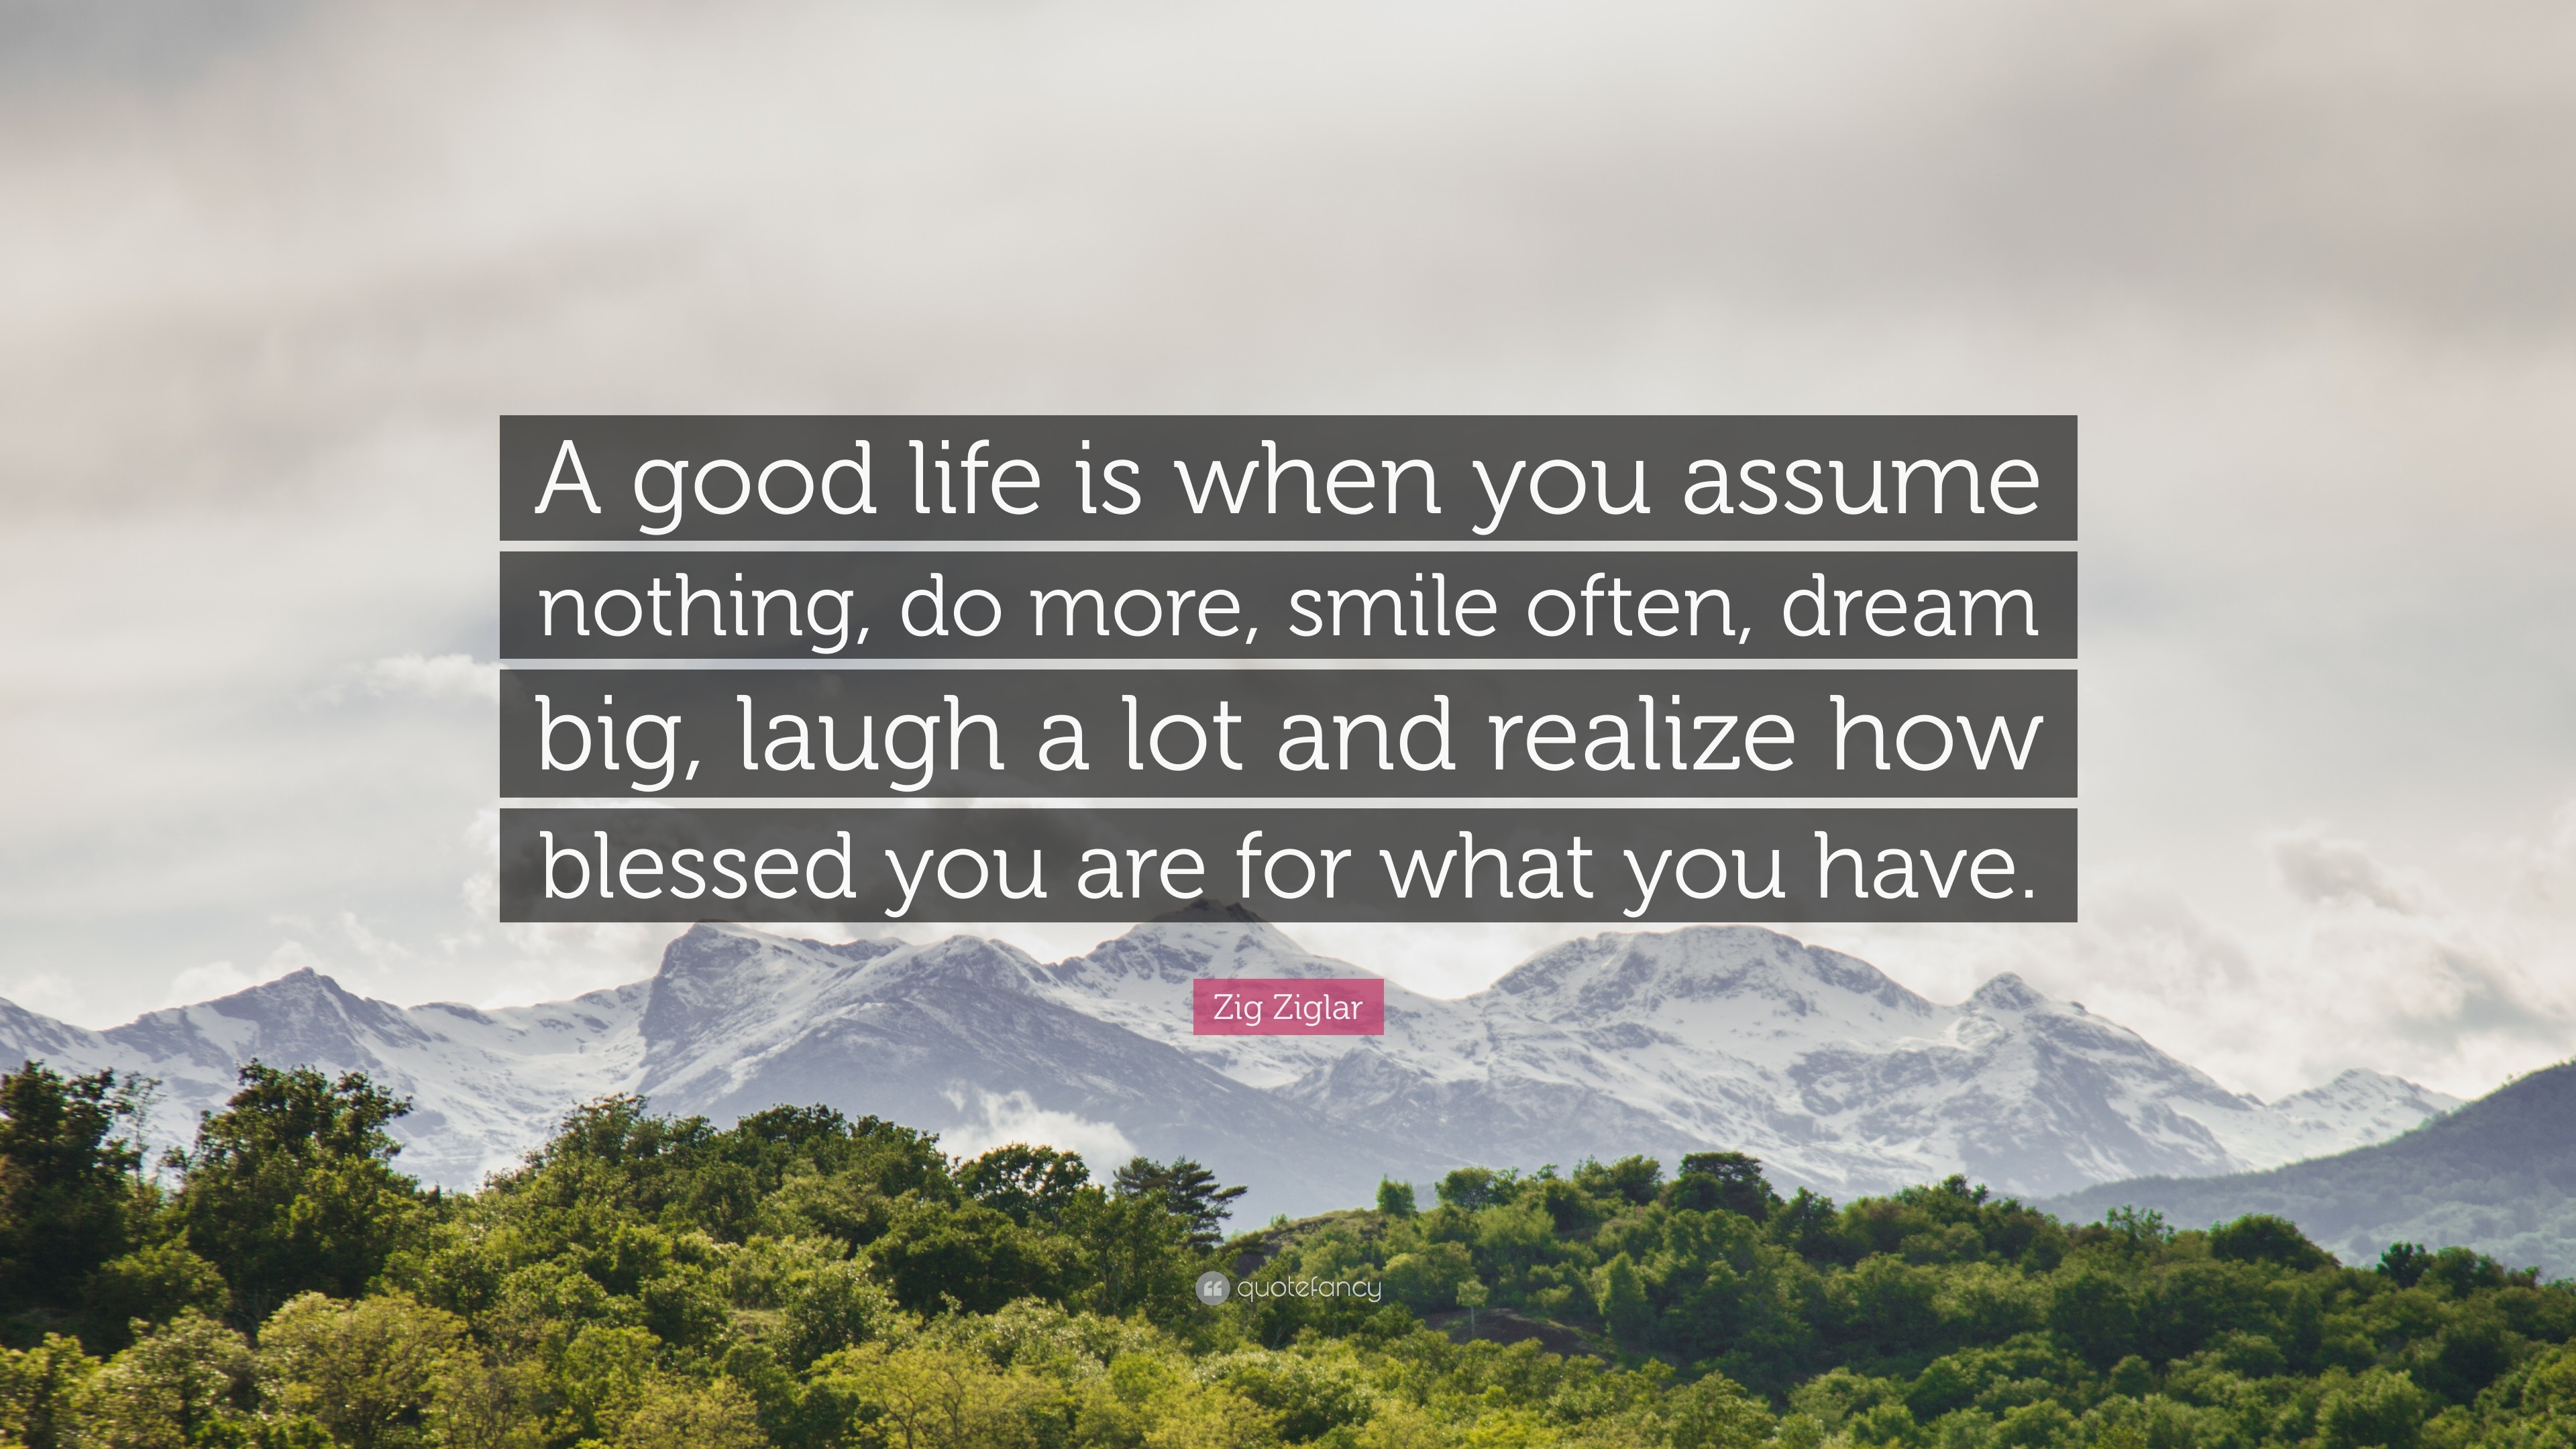 Zig Ziglar Quote “A good life is when you assume nothing do more